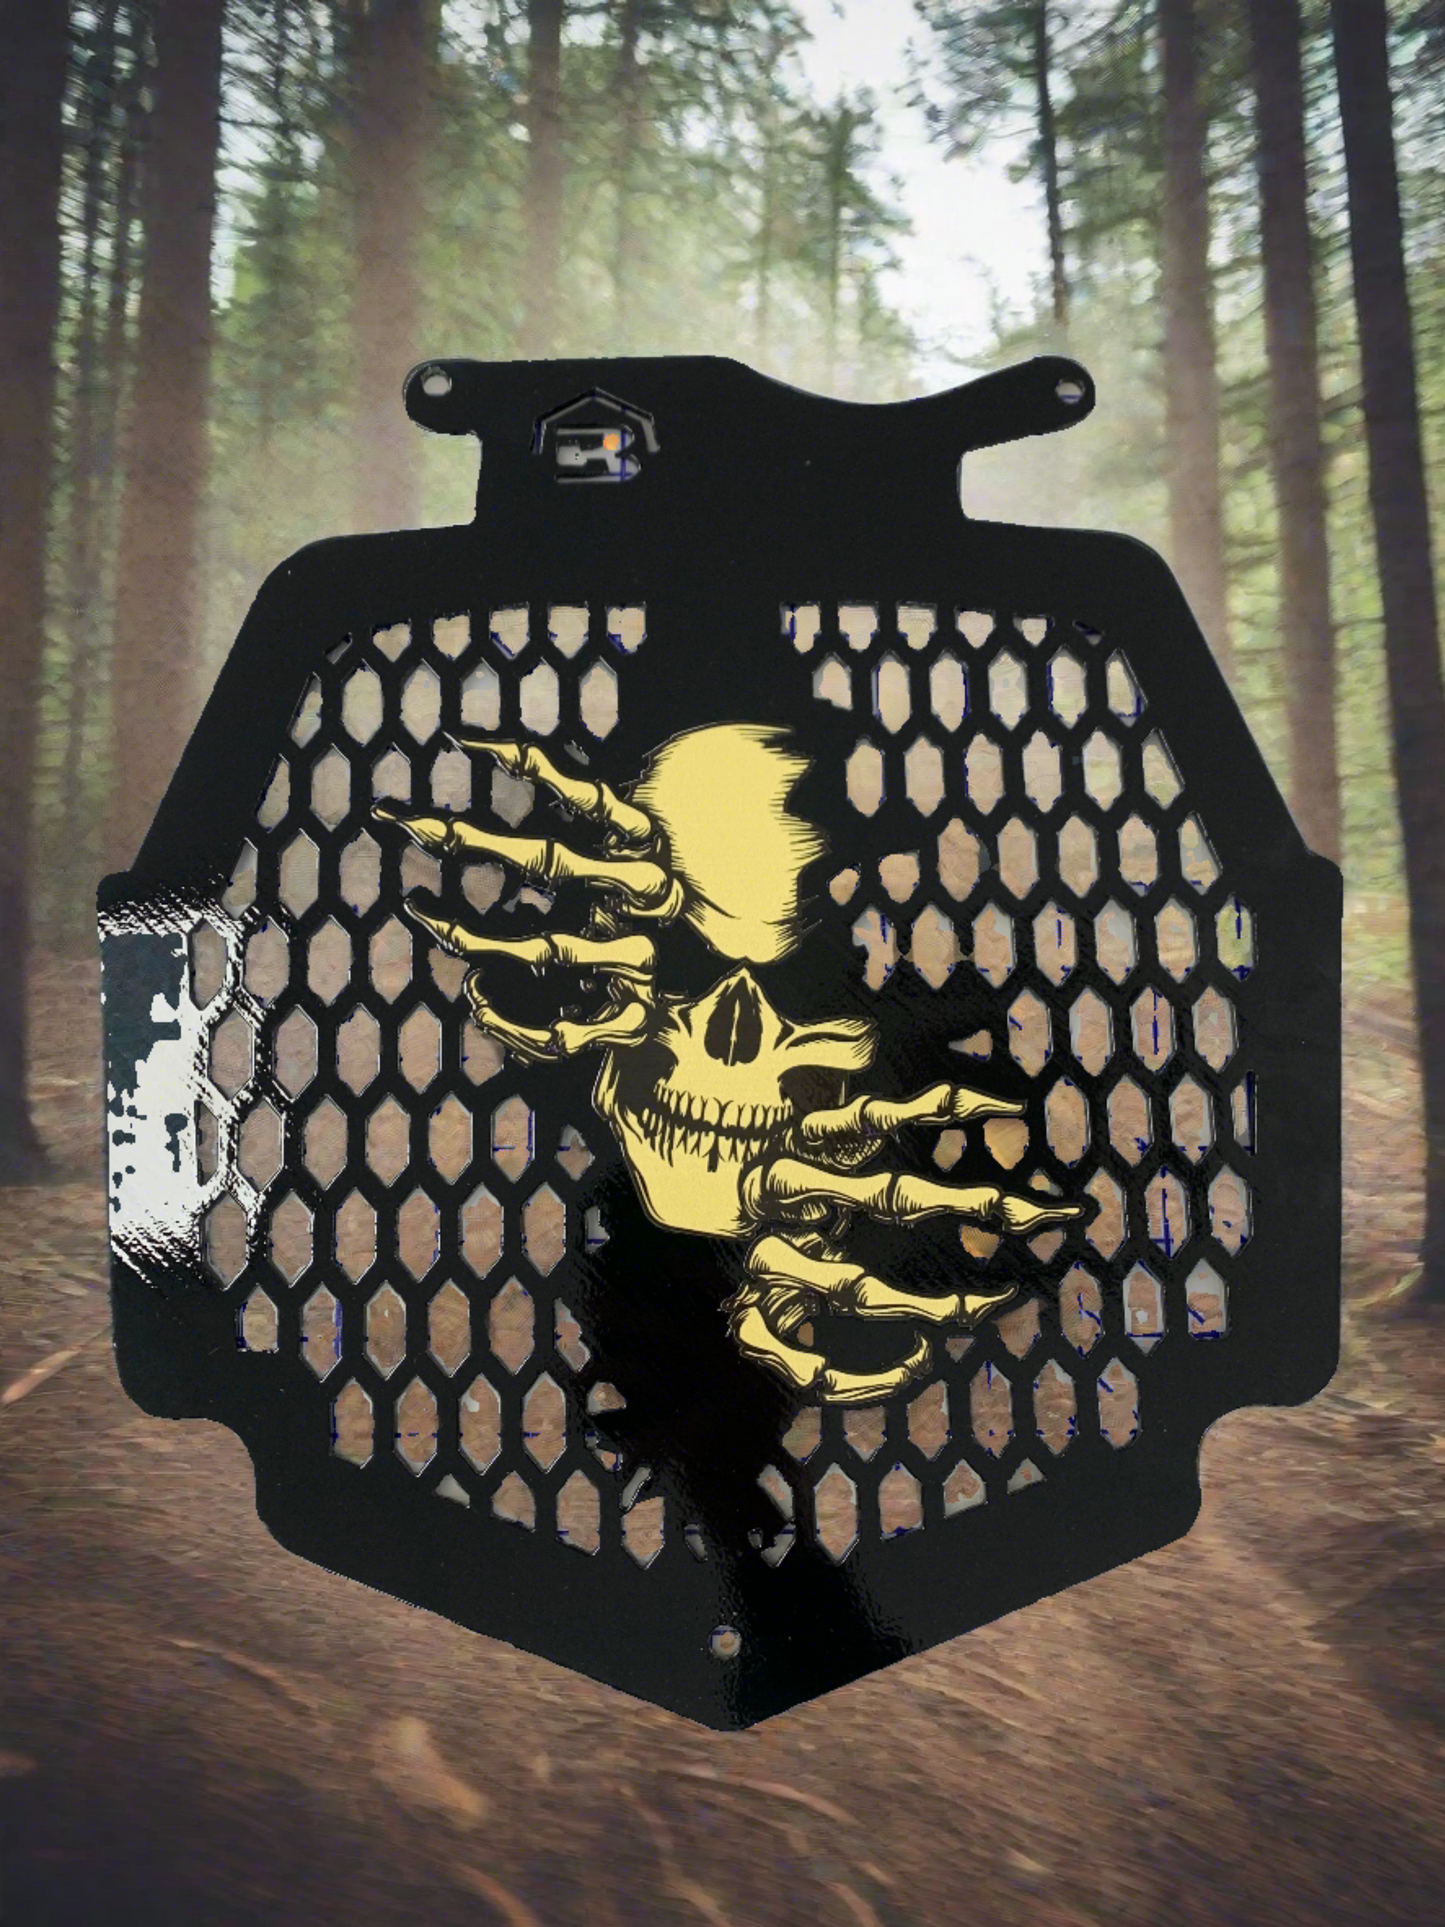 Ripping Skull Radiator cover fits Can Am Outlander Max XMR 450 570 650 850 1000 - Your Color Choices